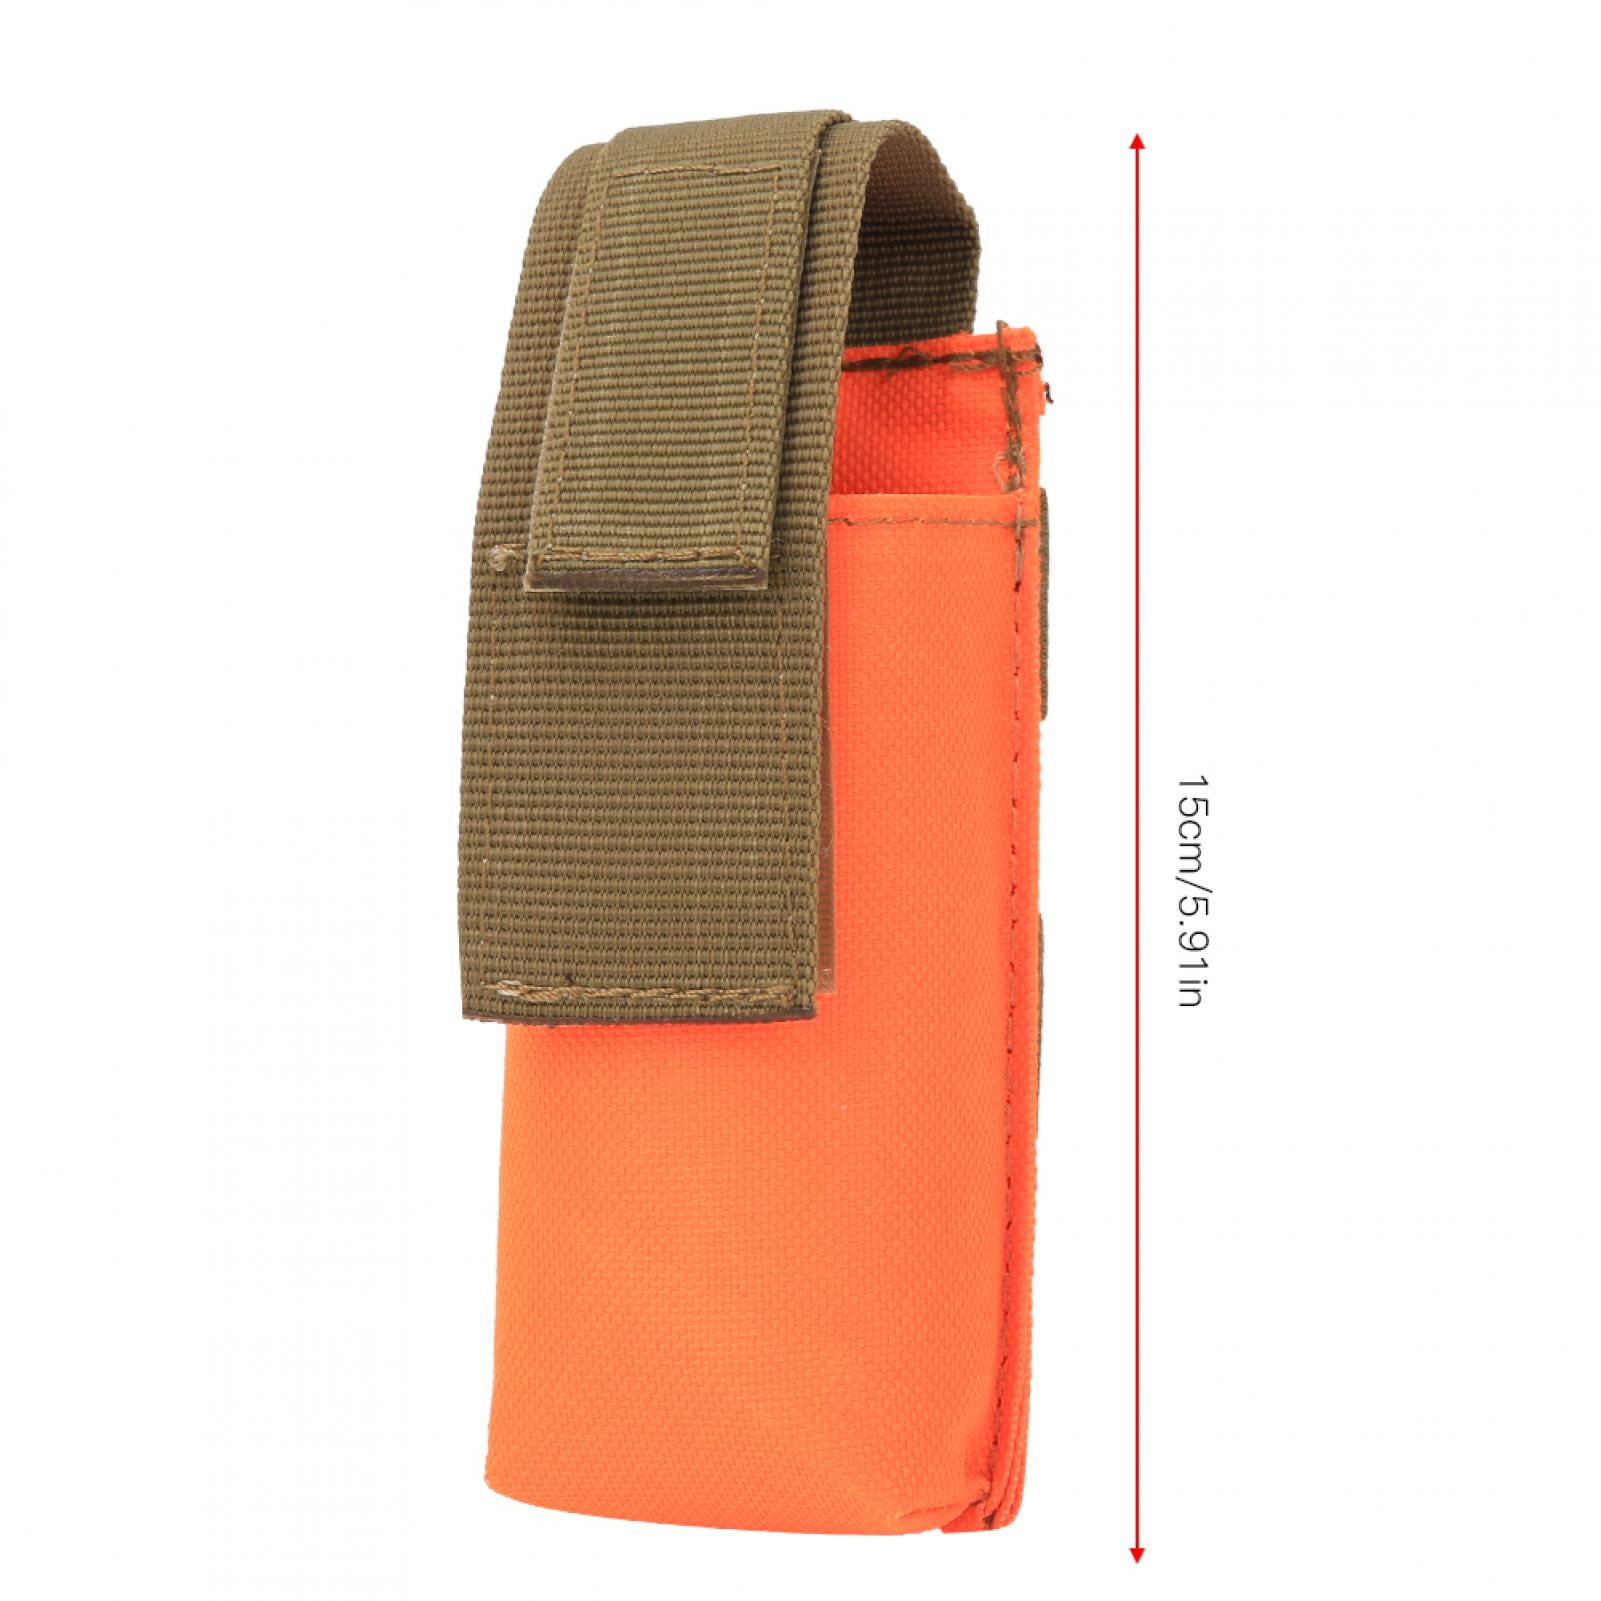 Details about   Portable Robust Tourniquet Case Made of Nylon with Molle Strap